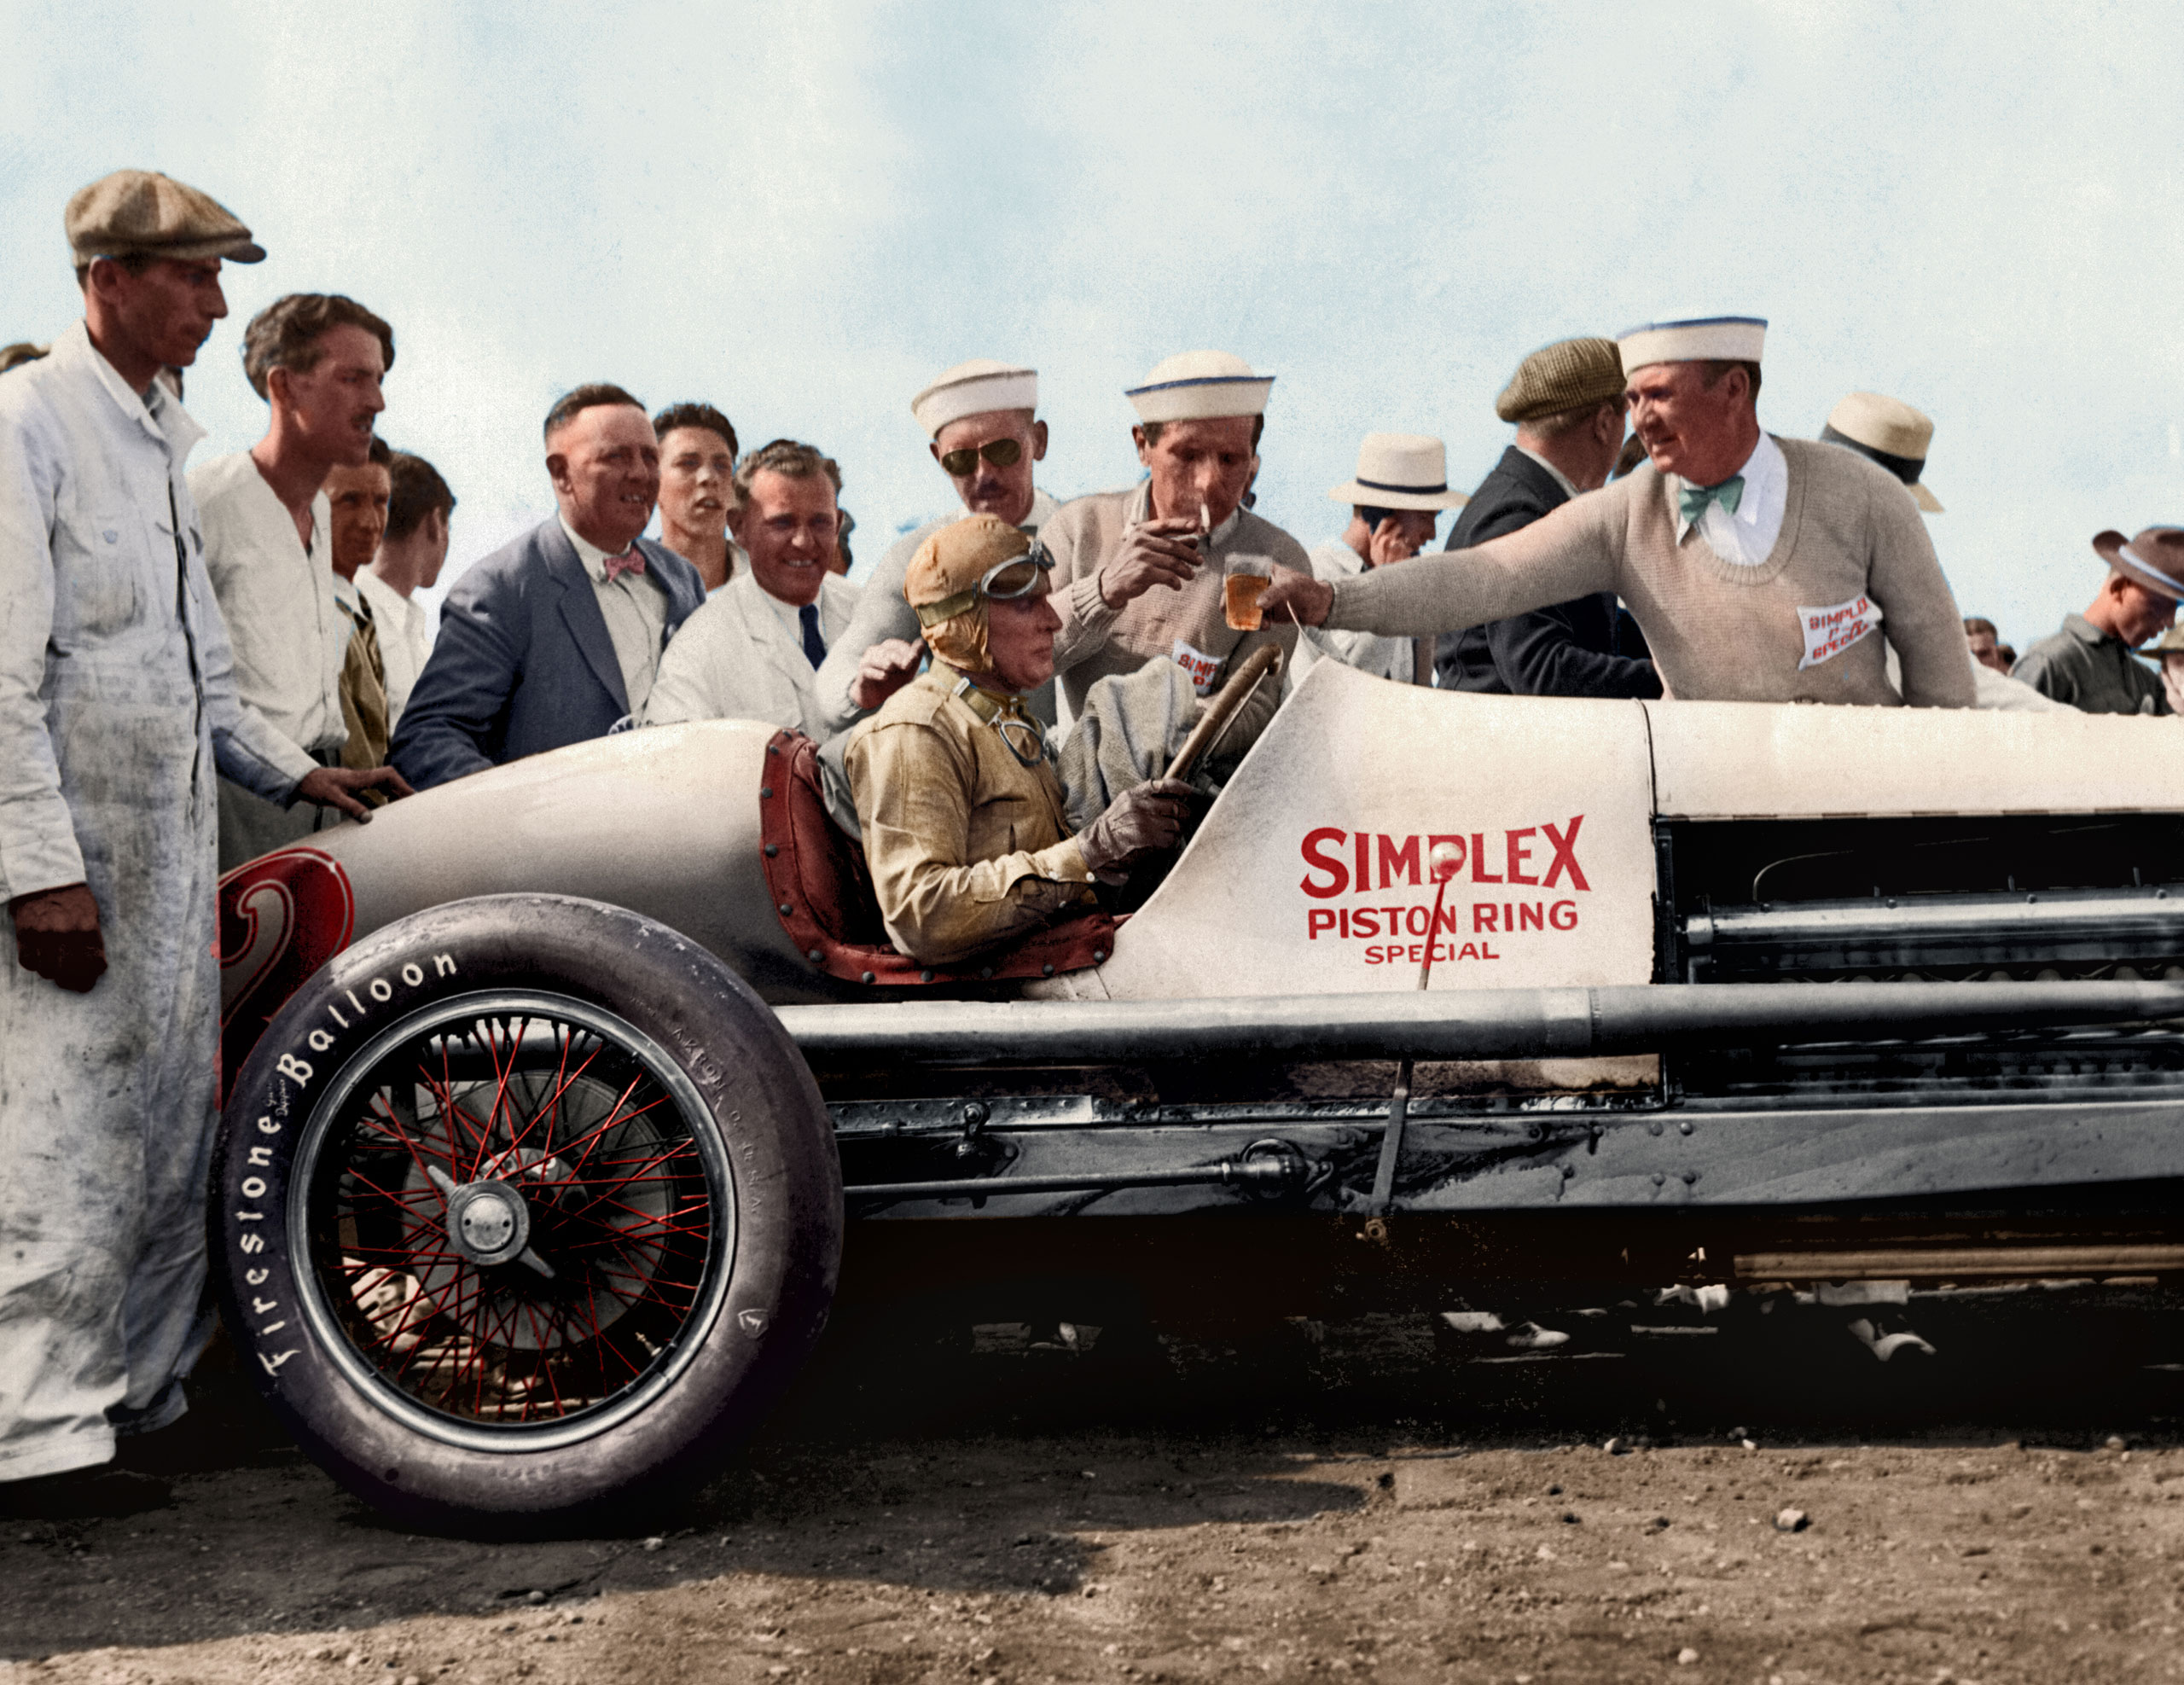 Race car driver Ray Keech in his Simplex Piston Ring Special #2 race car after winning the Indy 500. Indianapolis, Indiana, 1929.